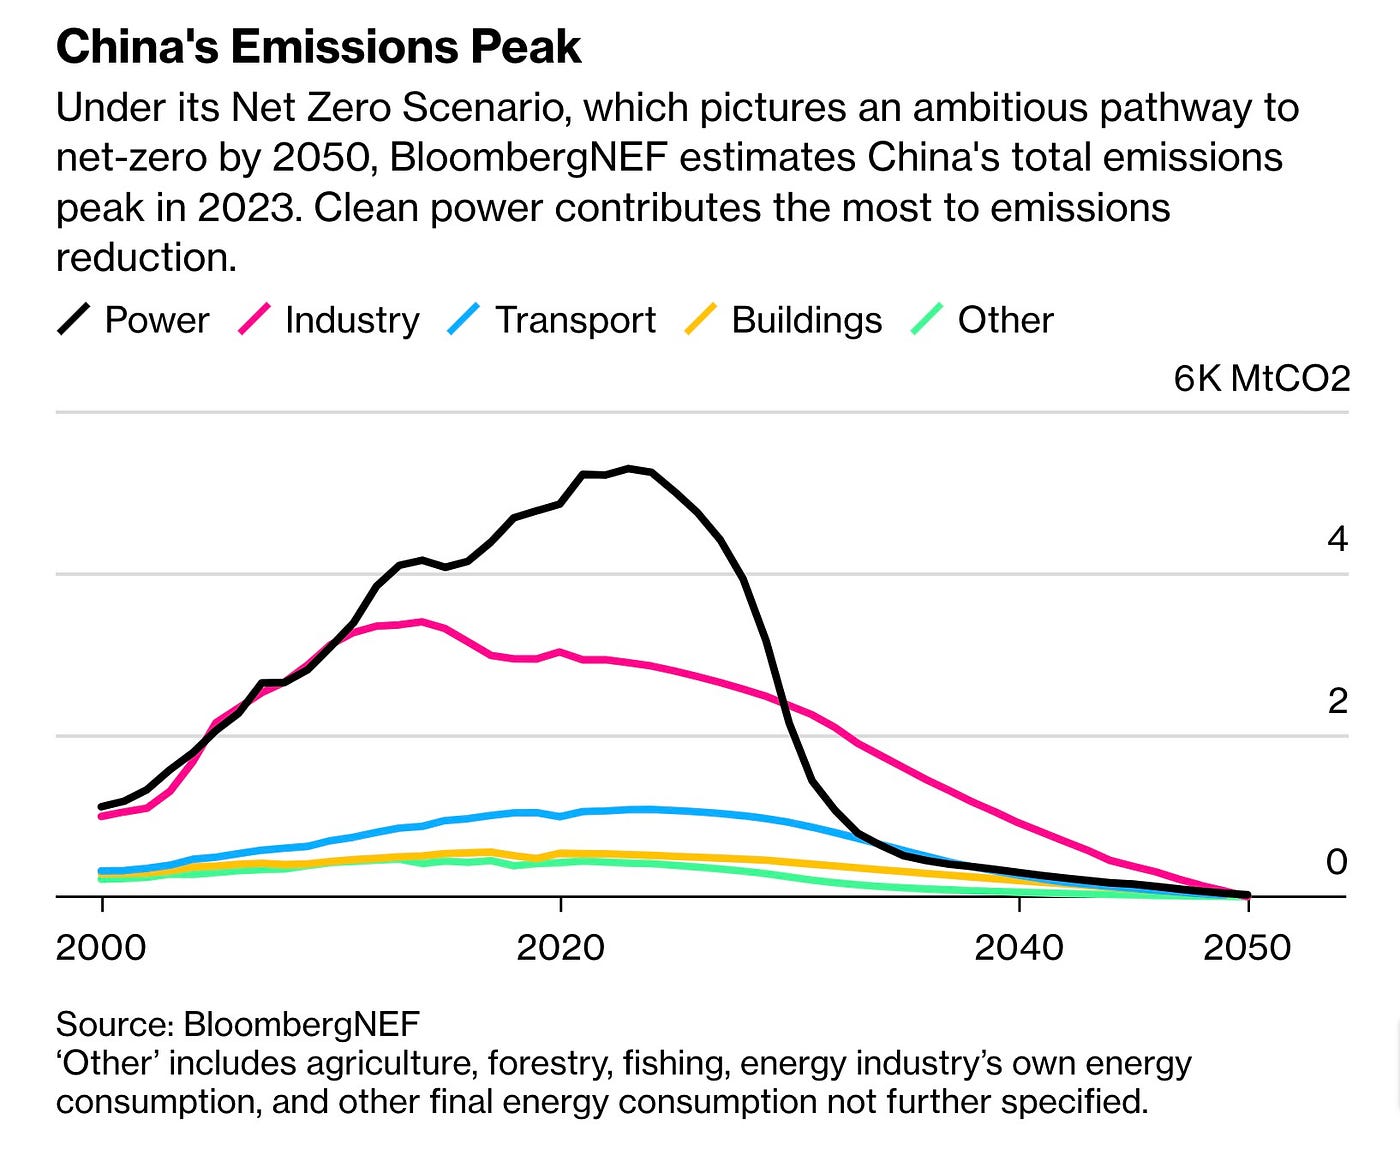 How China Is Leading On Climate While America Drags Us Down (In Two Charts)